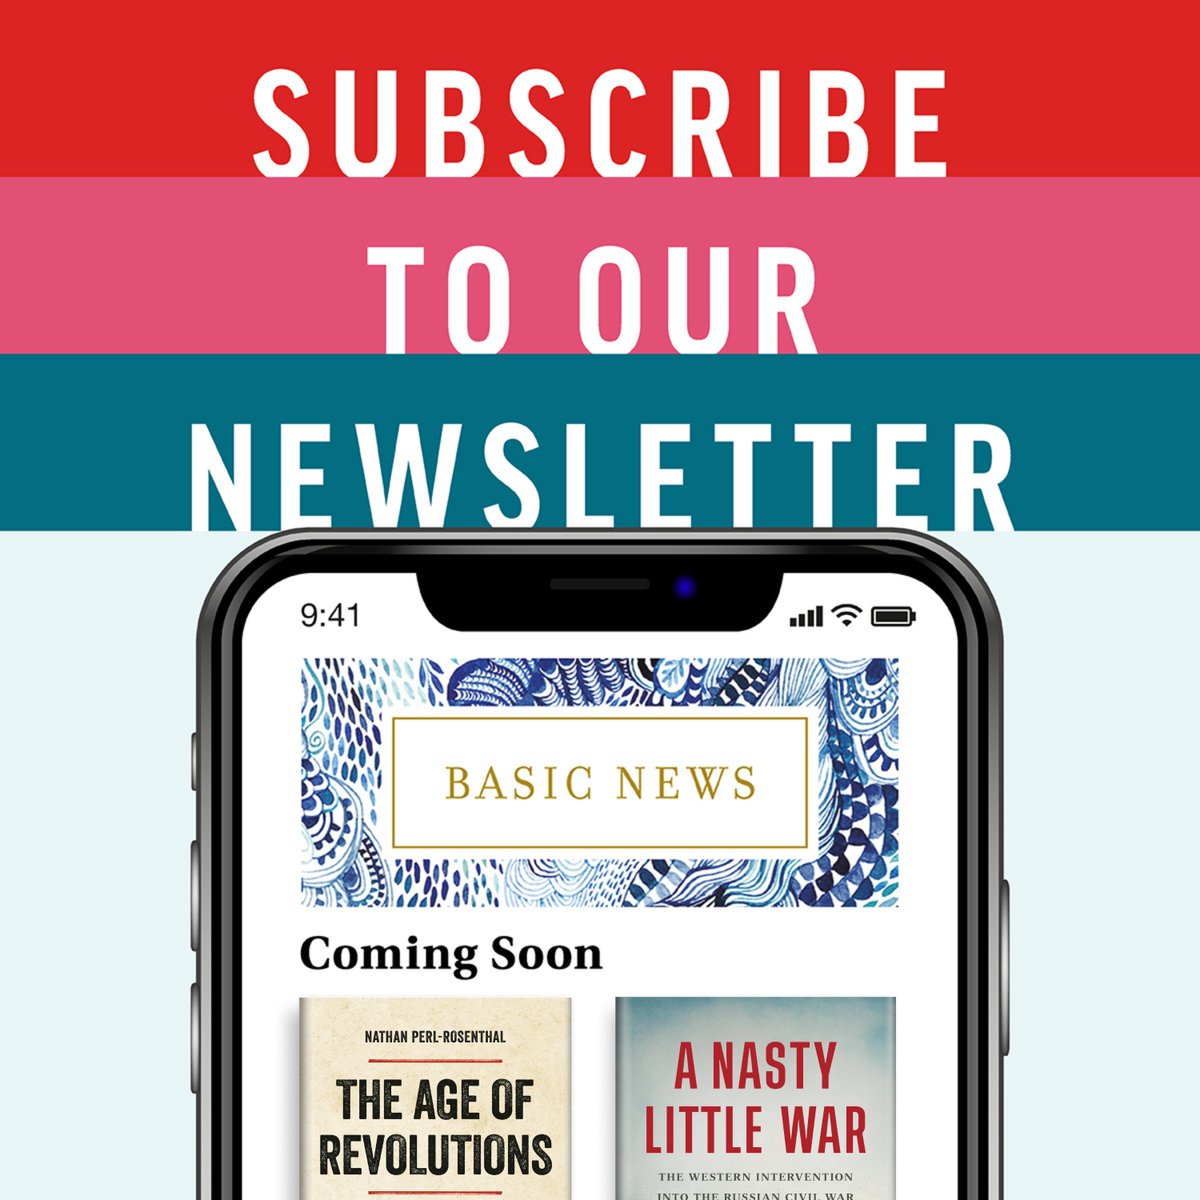 Don’t let this golden opportunity slip away — plug into all the exciting updates from Basic Books this season! Sign up now at basicbooks.com and enjoy a 20% discount on your first purchase 🎉